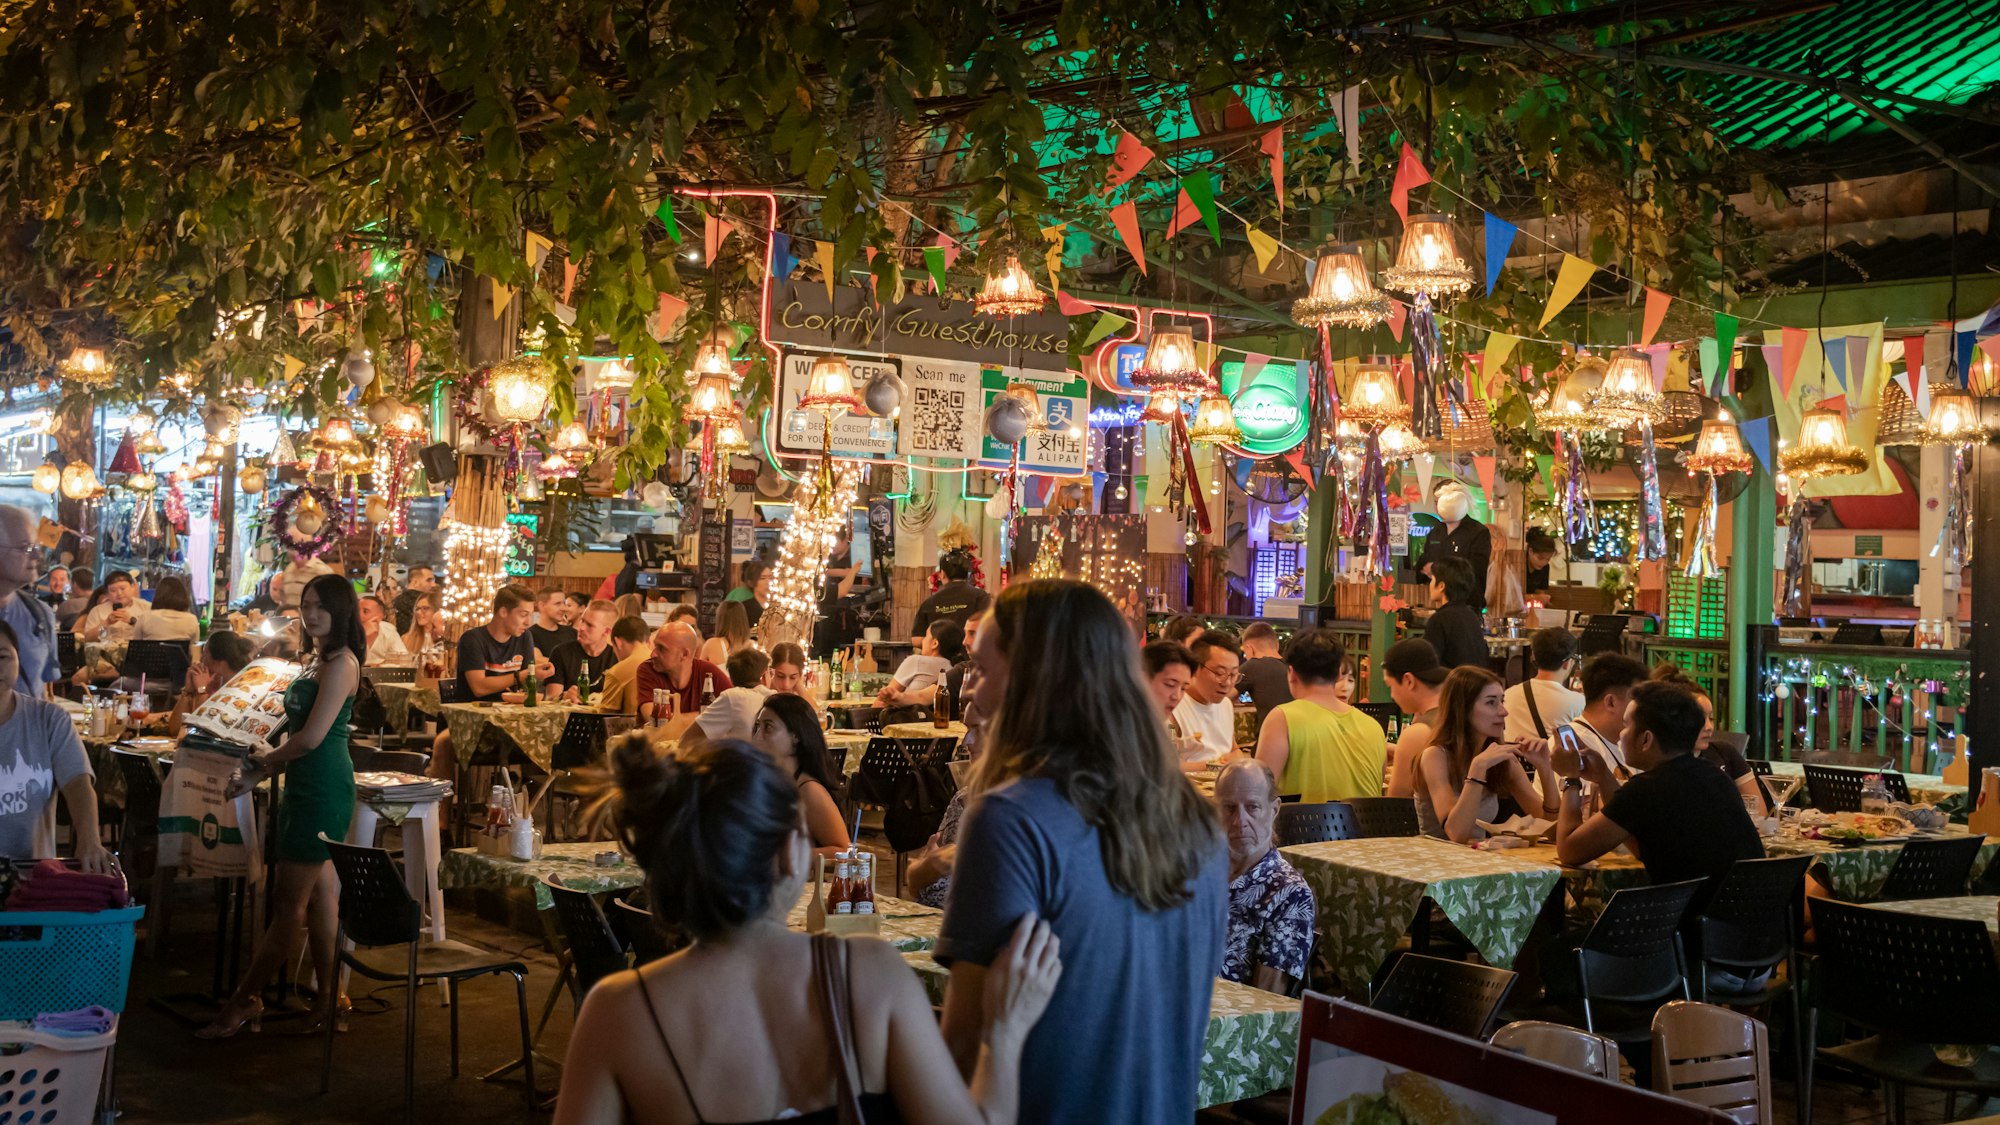 People in an open air restaurant at night time